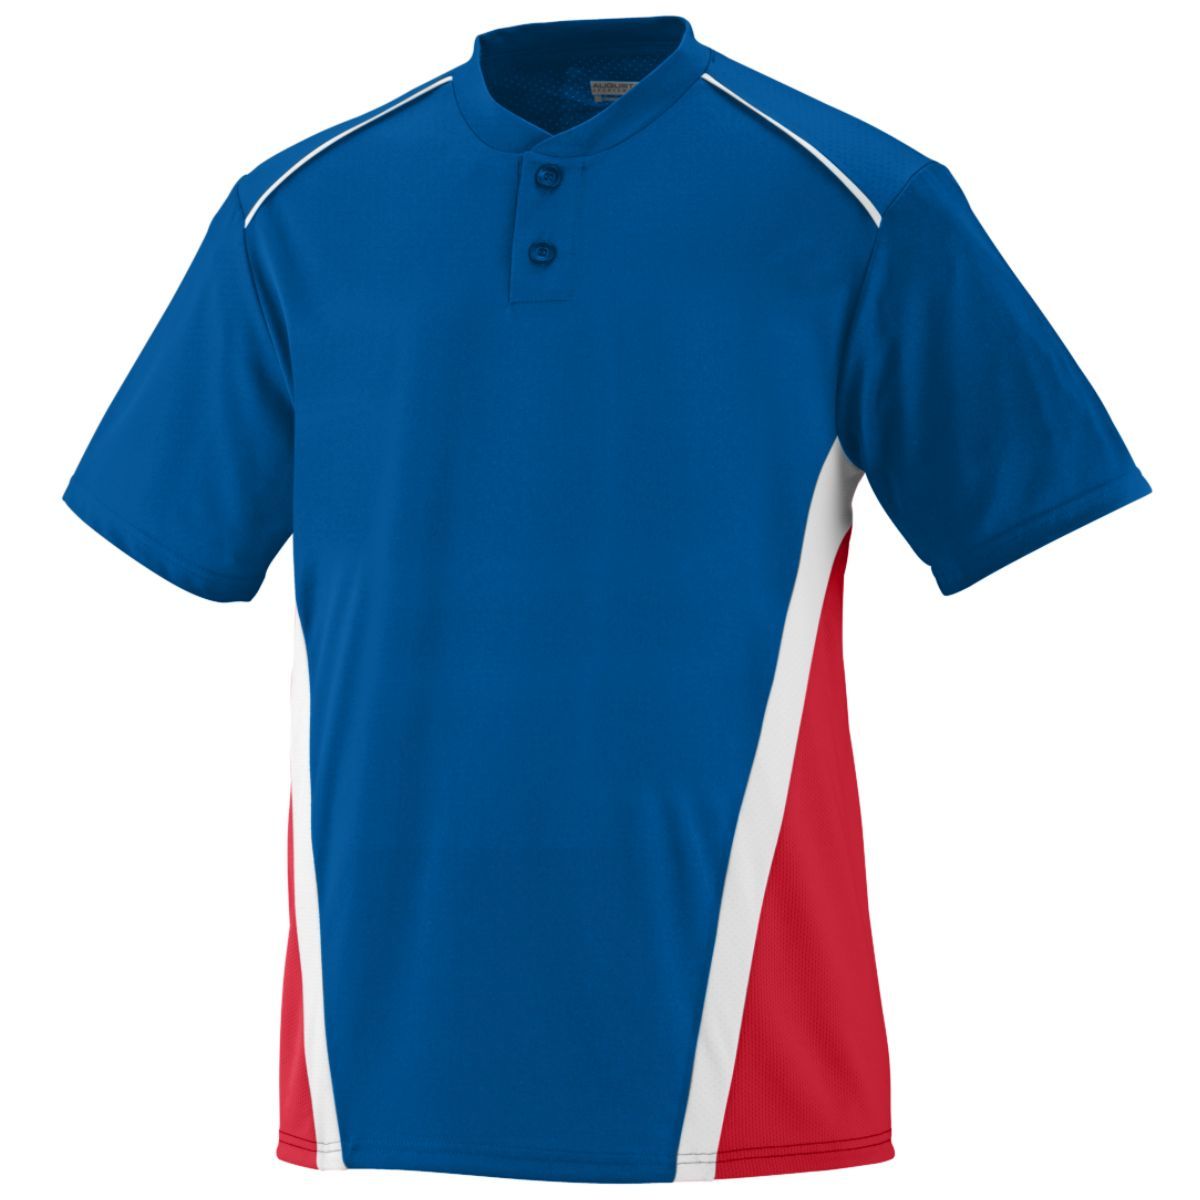 Augusta Sportswear Rbi Jersey in Royal/Red/White  -Part of the Adult, Adult-Jersey, Augusta-Products, Softball, Shirts product lines at KanaleyCreations.com